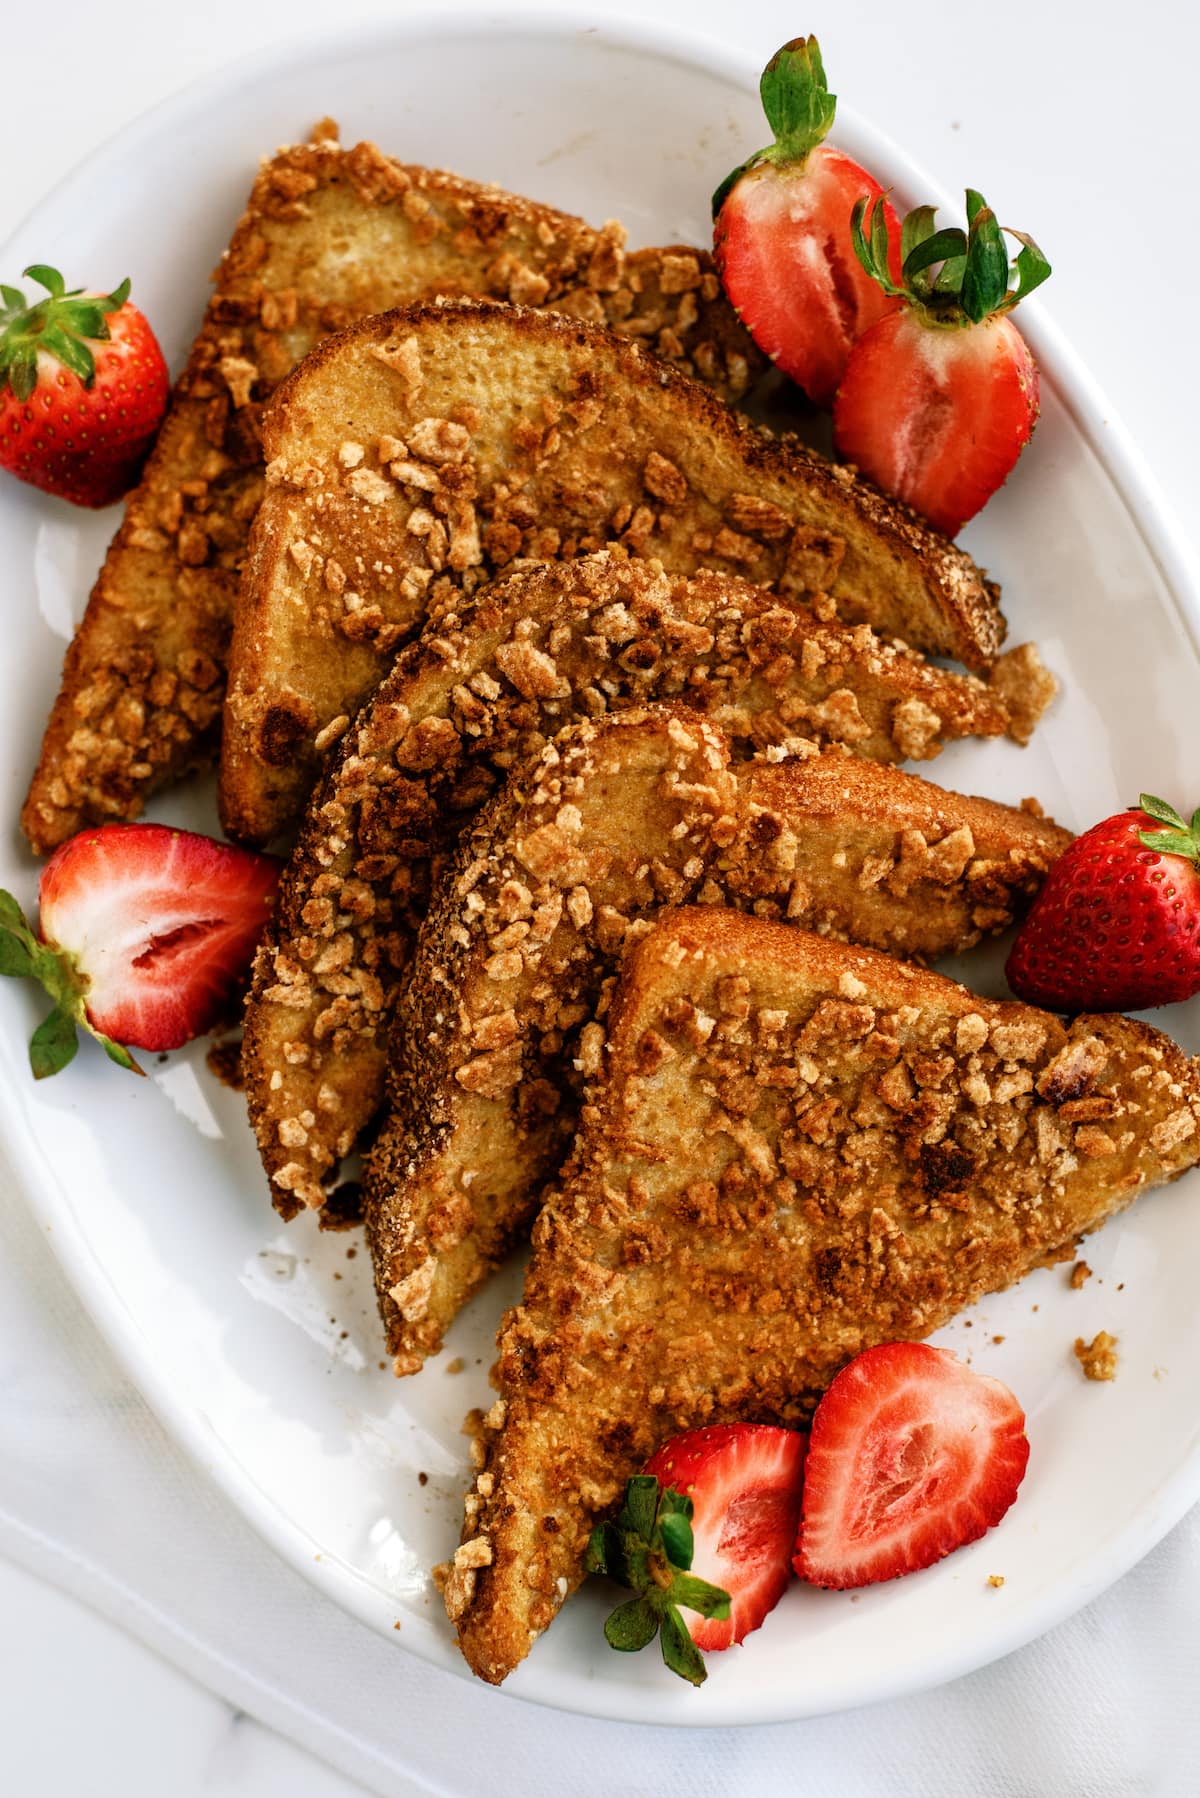 Cinnamon Toast Crunch French toast sliced on a plate with strawberries